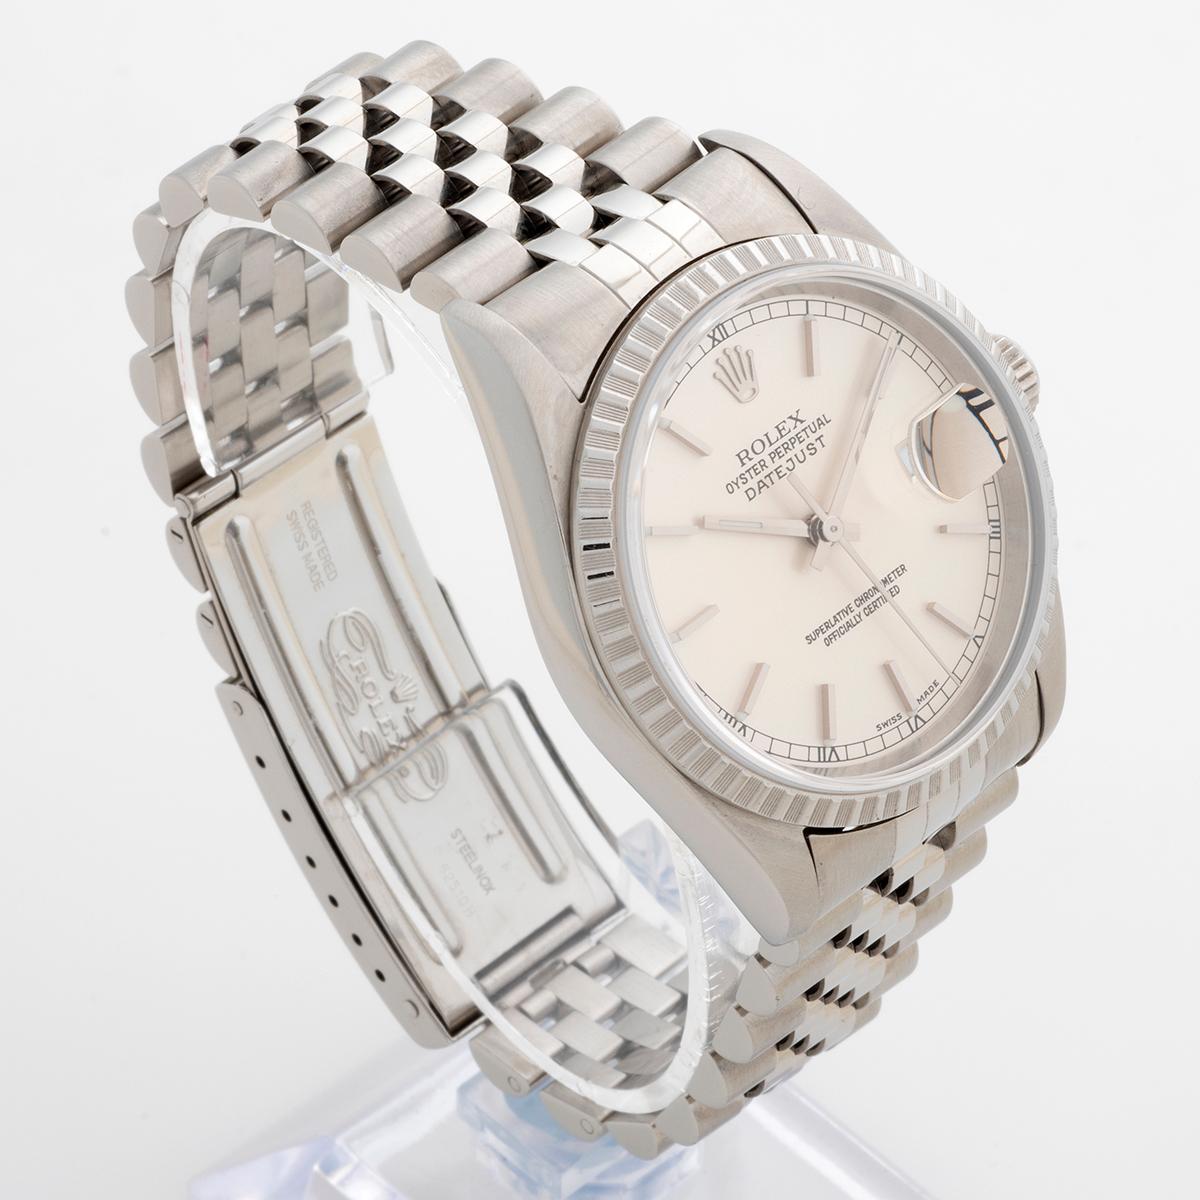 Rolex Datejust Ref 16220 Wristwatch, Jubilee Bracelet, Full Set, UK 2003. In Excellent Condition For Sale In Canterbury, GB